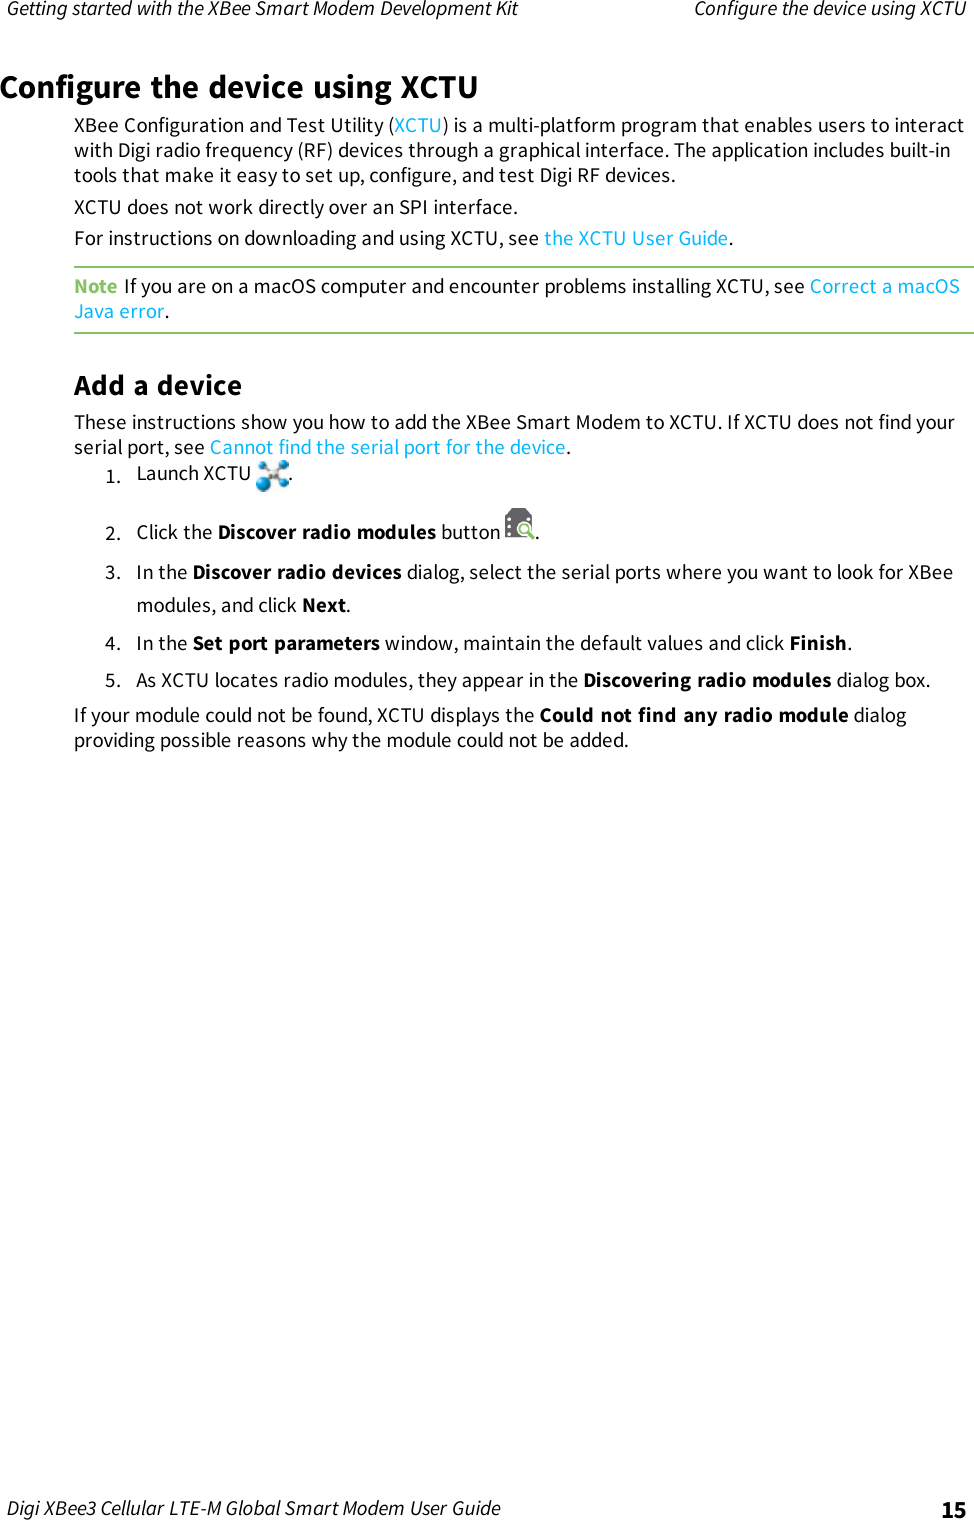 Page 15 of Digi XB3M1 XBee3 Cellular LTE-M User Manual 